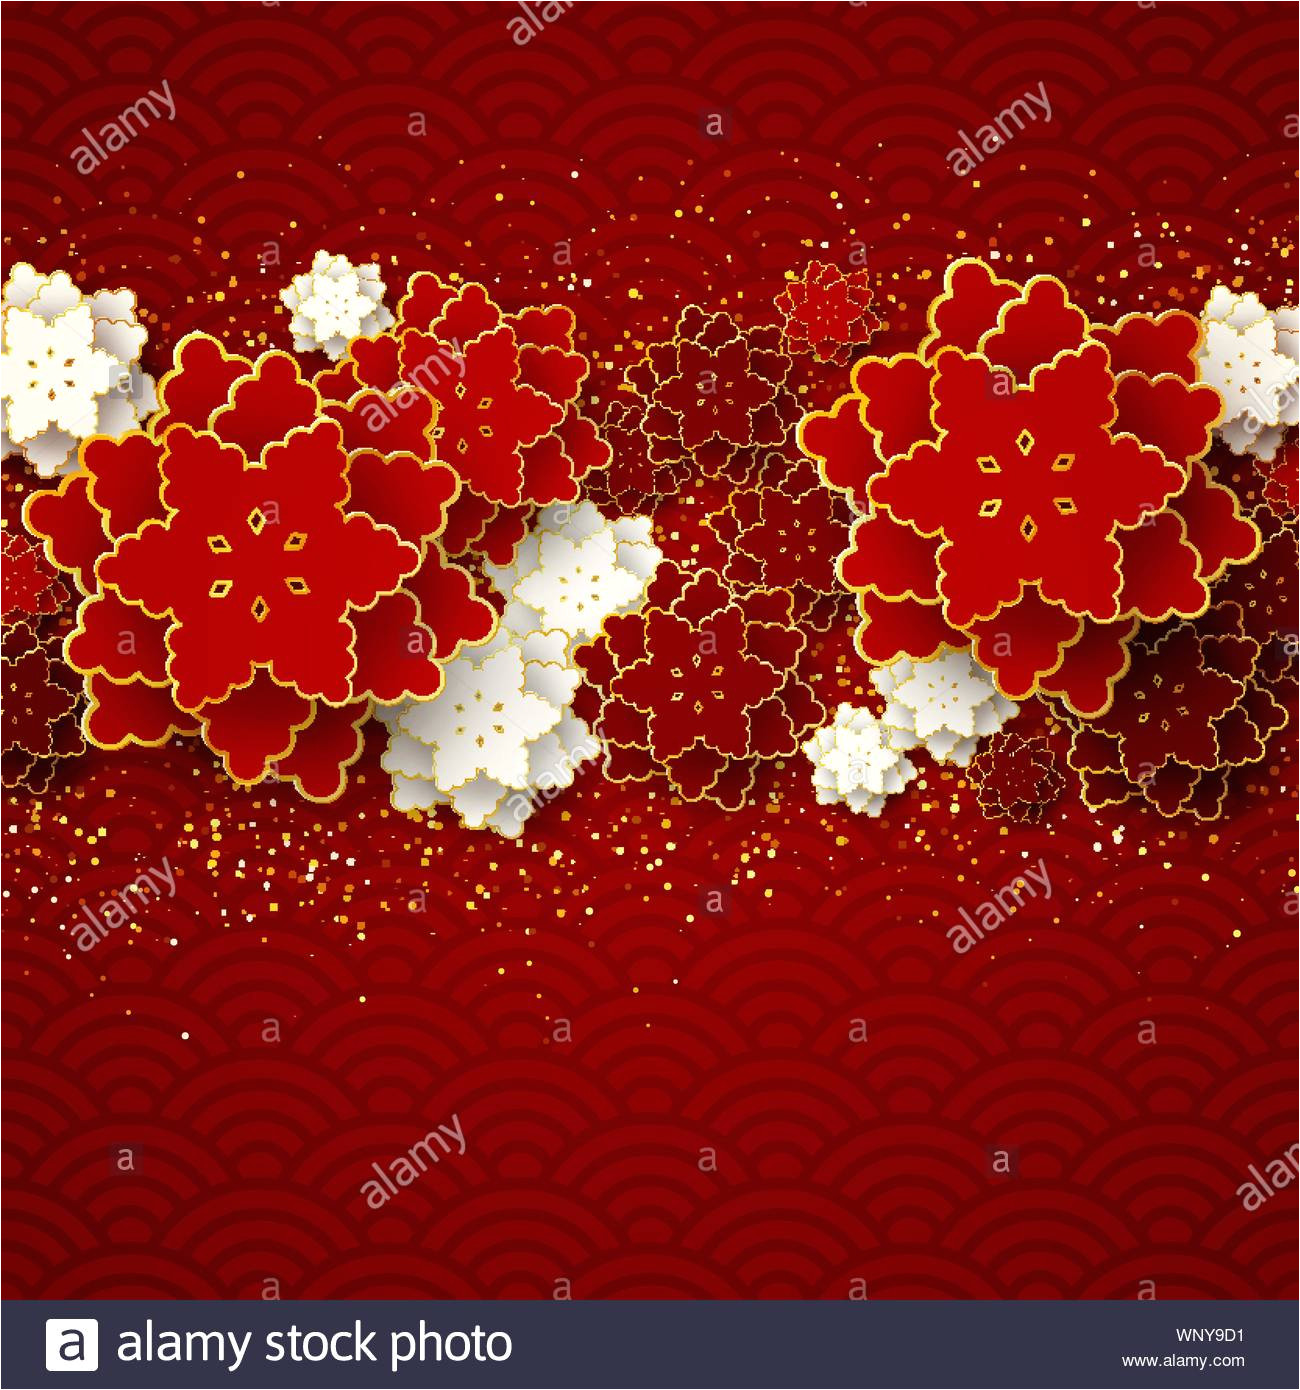 happy chinese new year 2020 red greeting card wny9d1 jpg